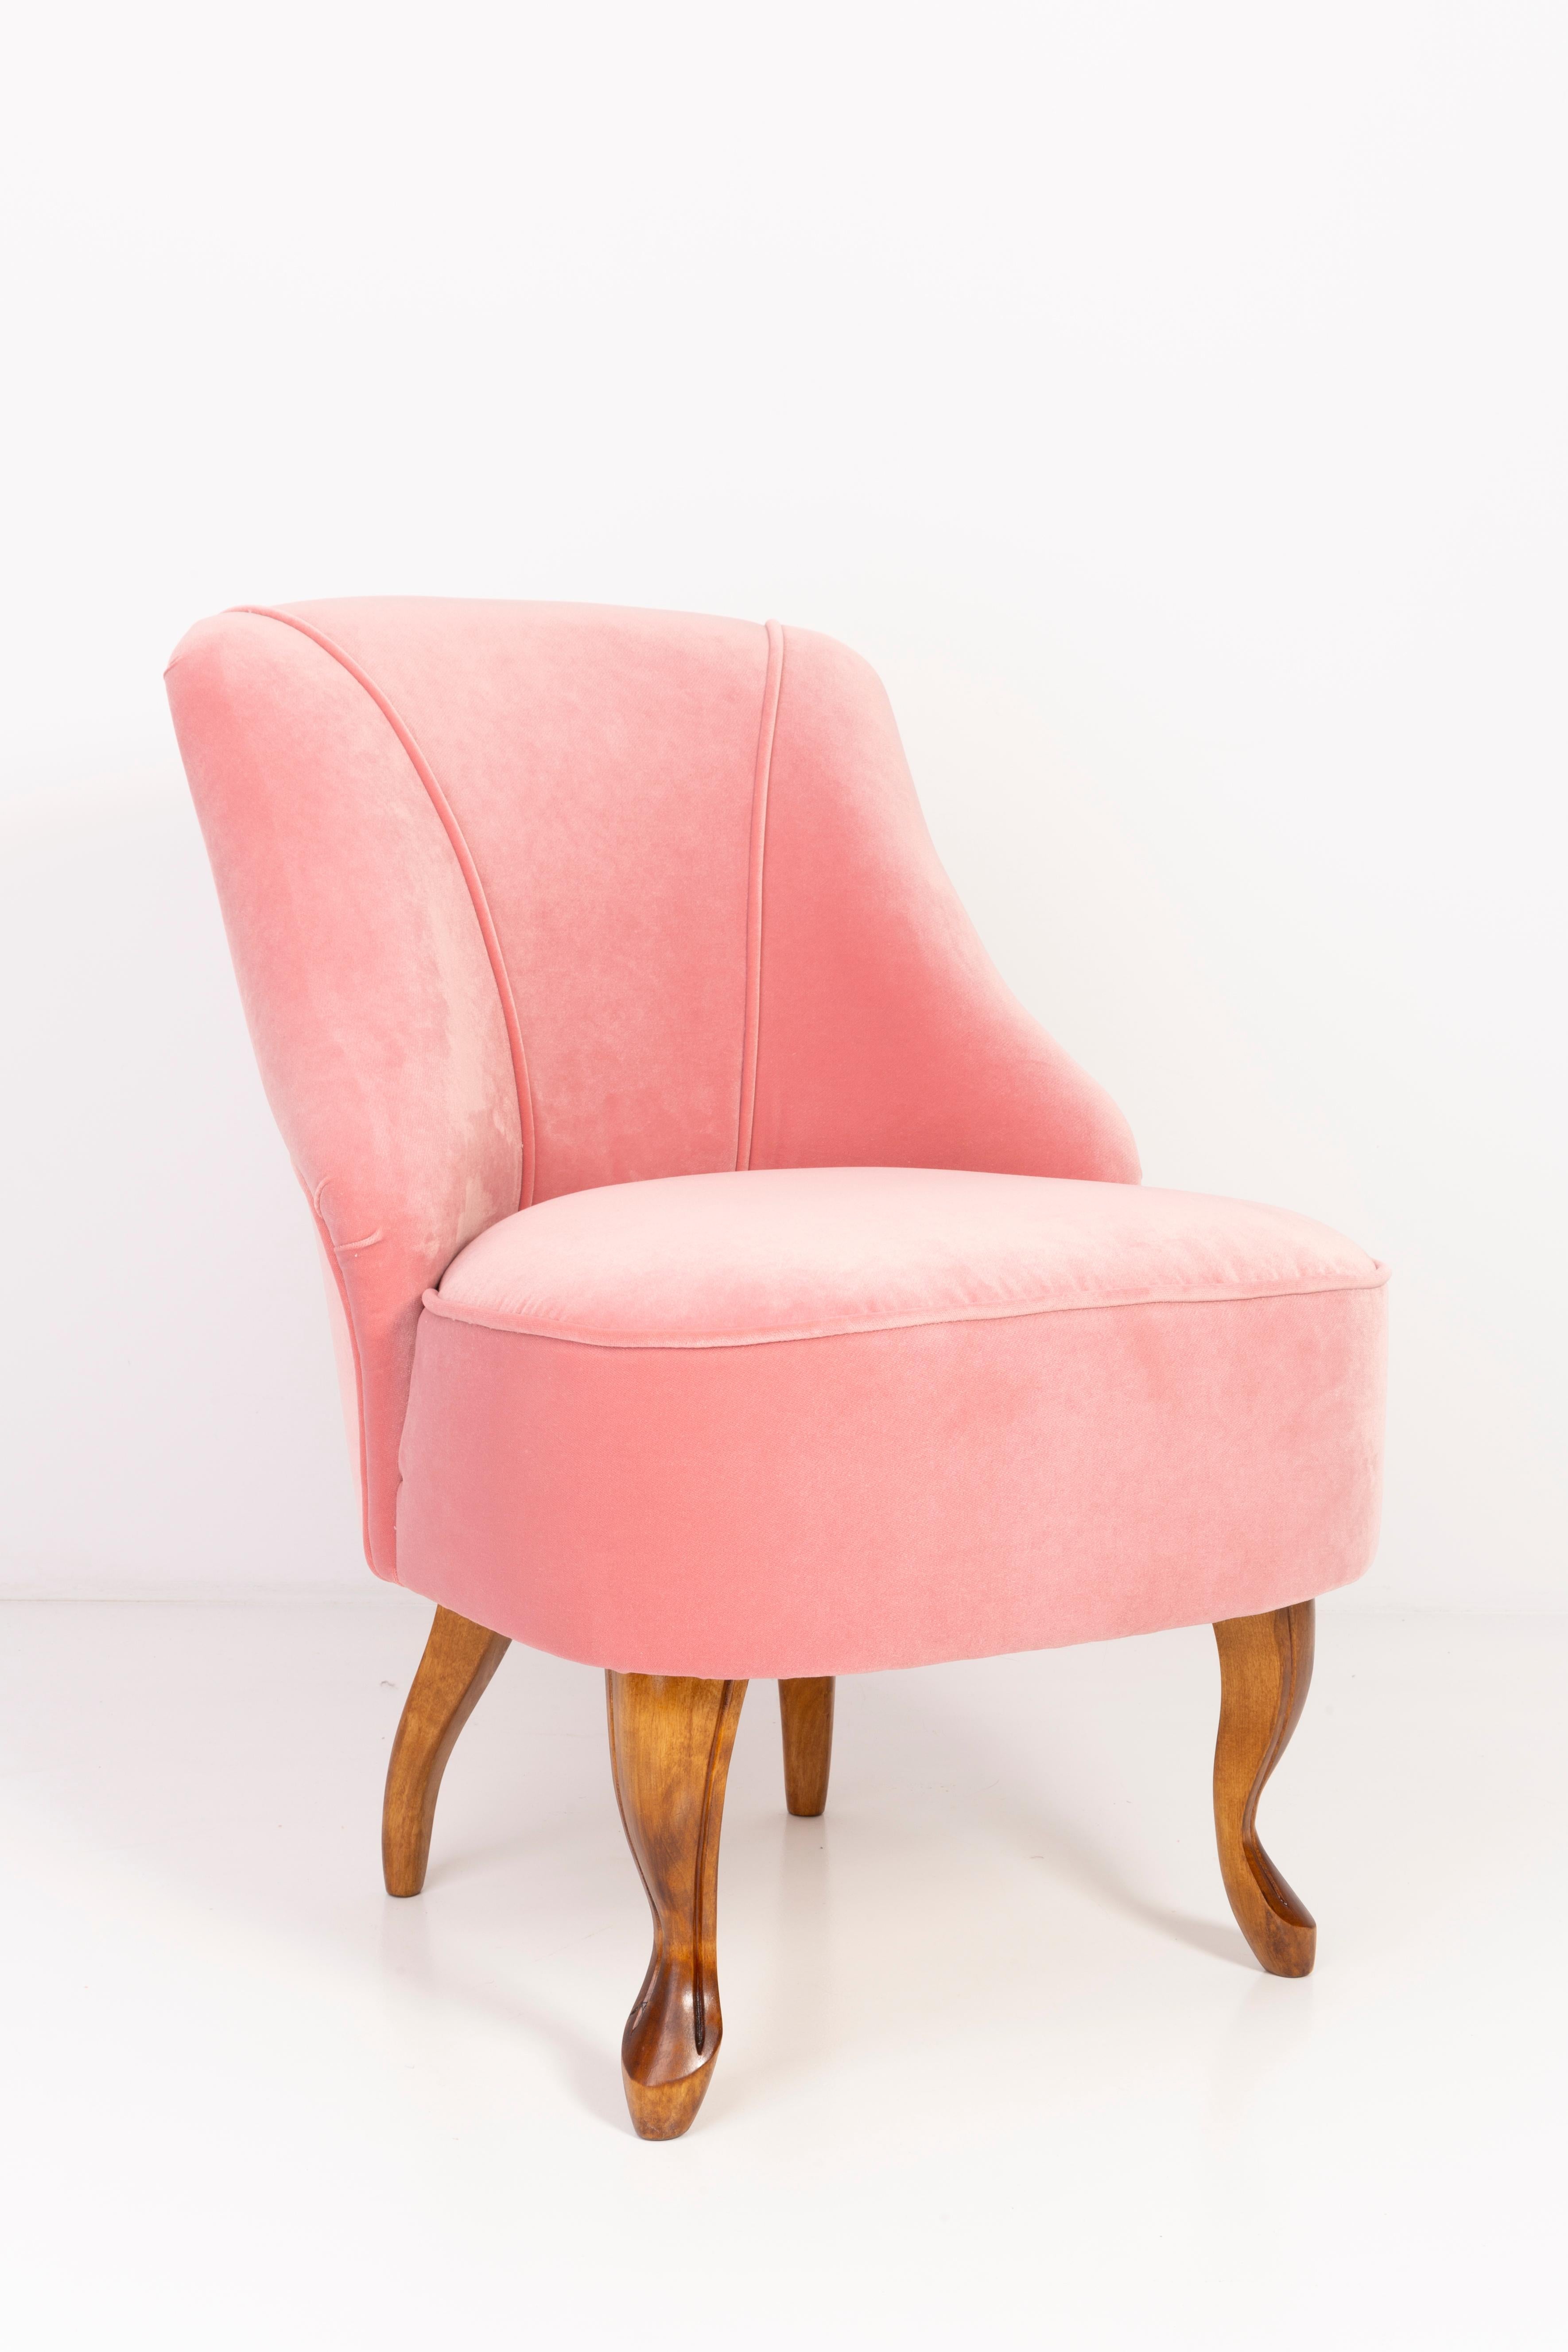 Hand-Crafted Set of Two 20th Century Art Deco Baby Pink Armchairs, 1950s For Sale